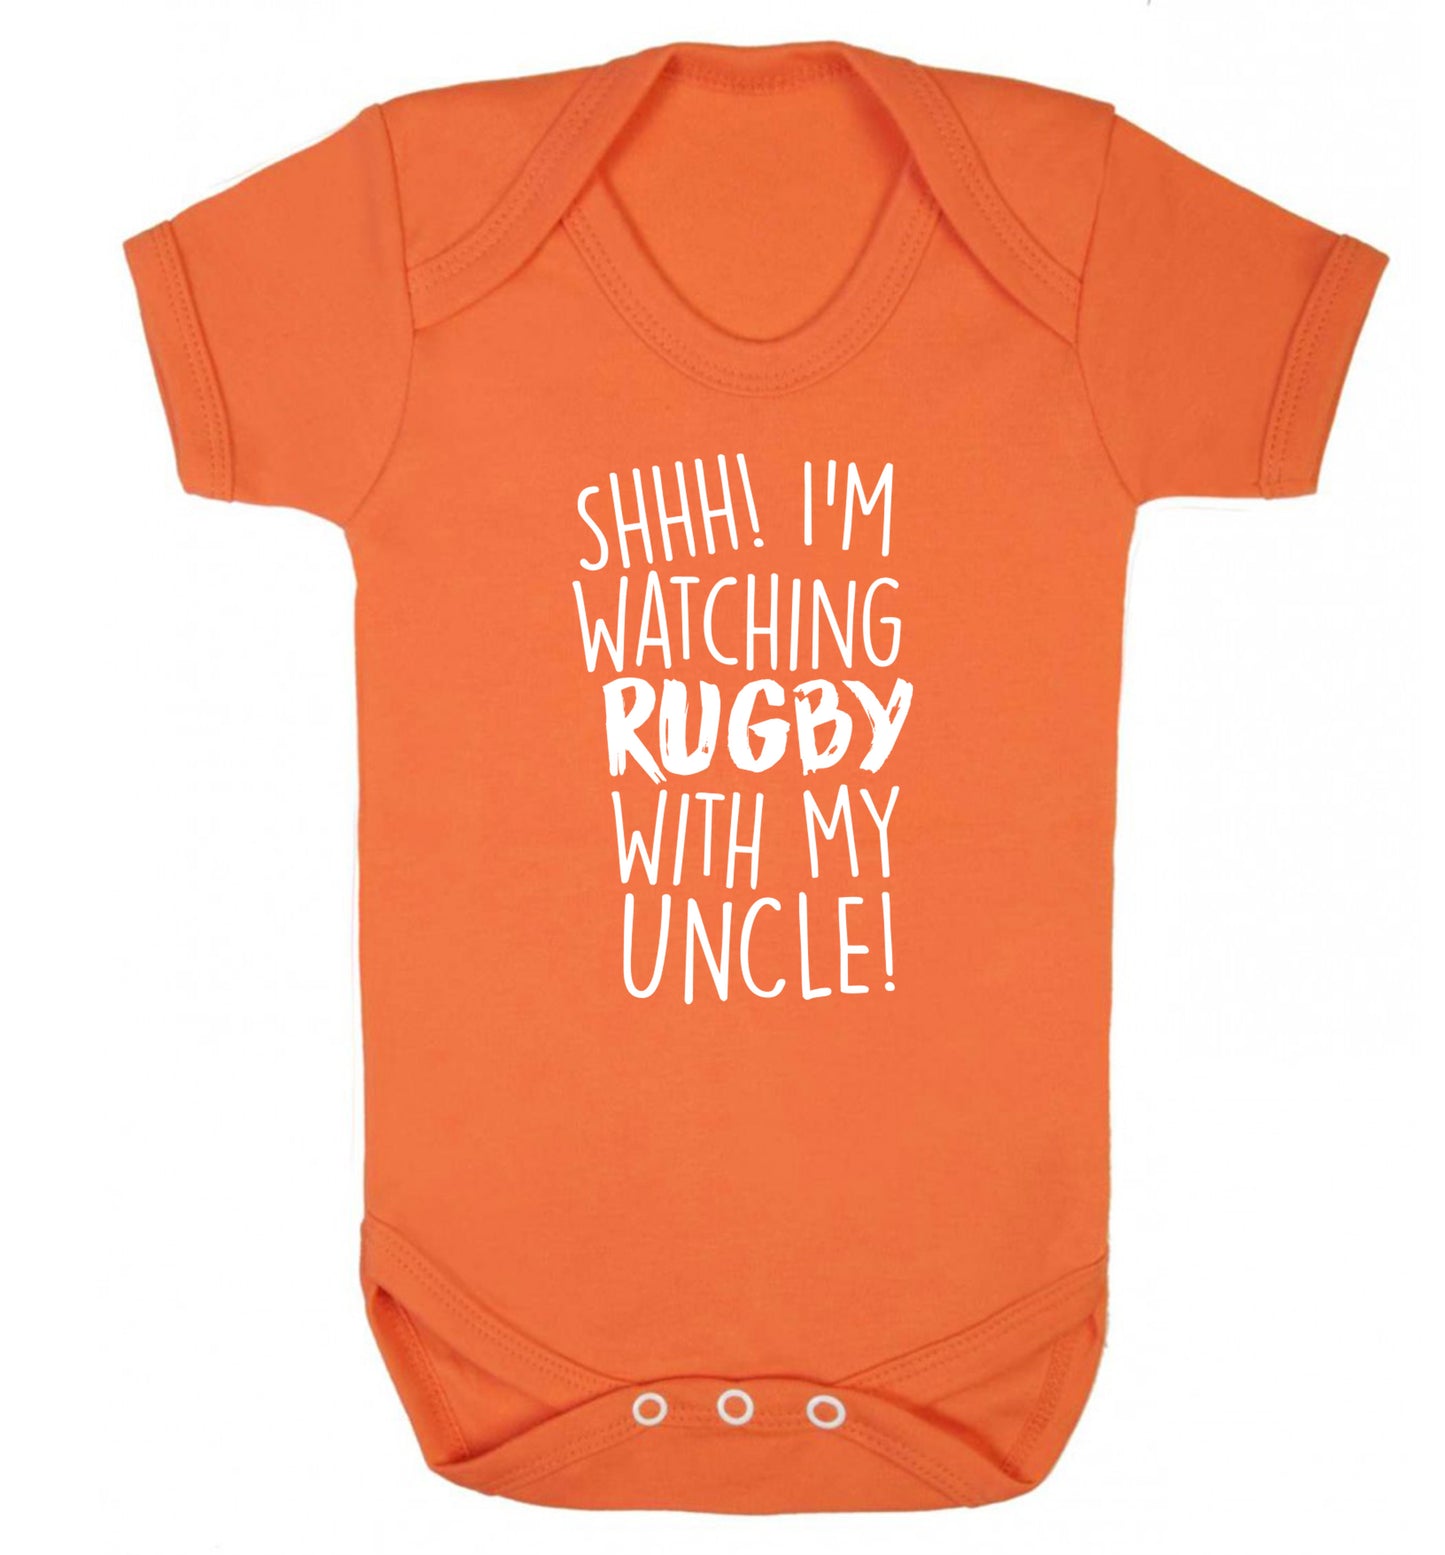 Shh.. I'm watching rugby with my uncle Baby Vest orange 18-24 months